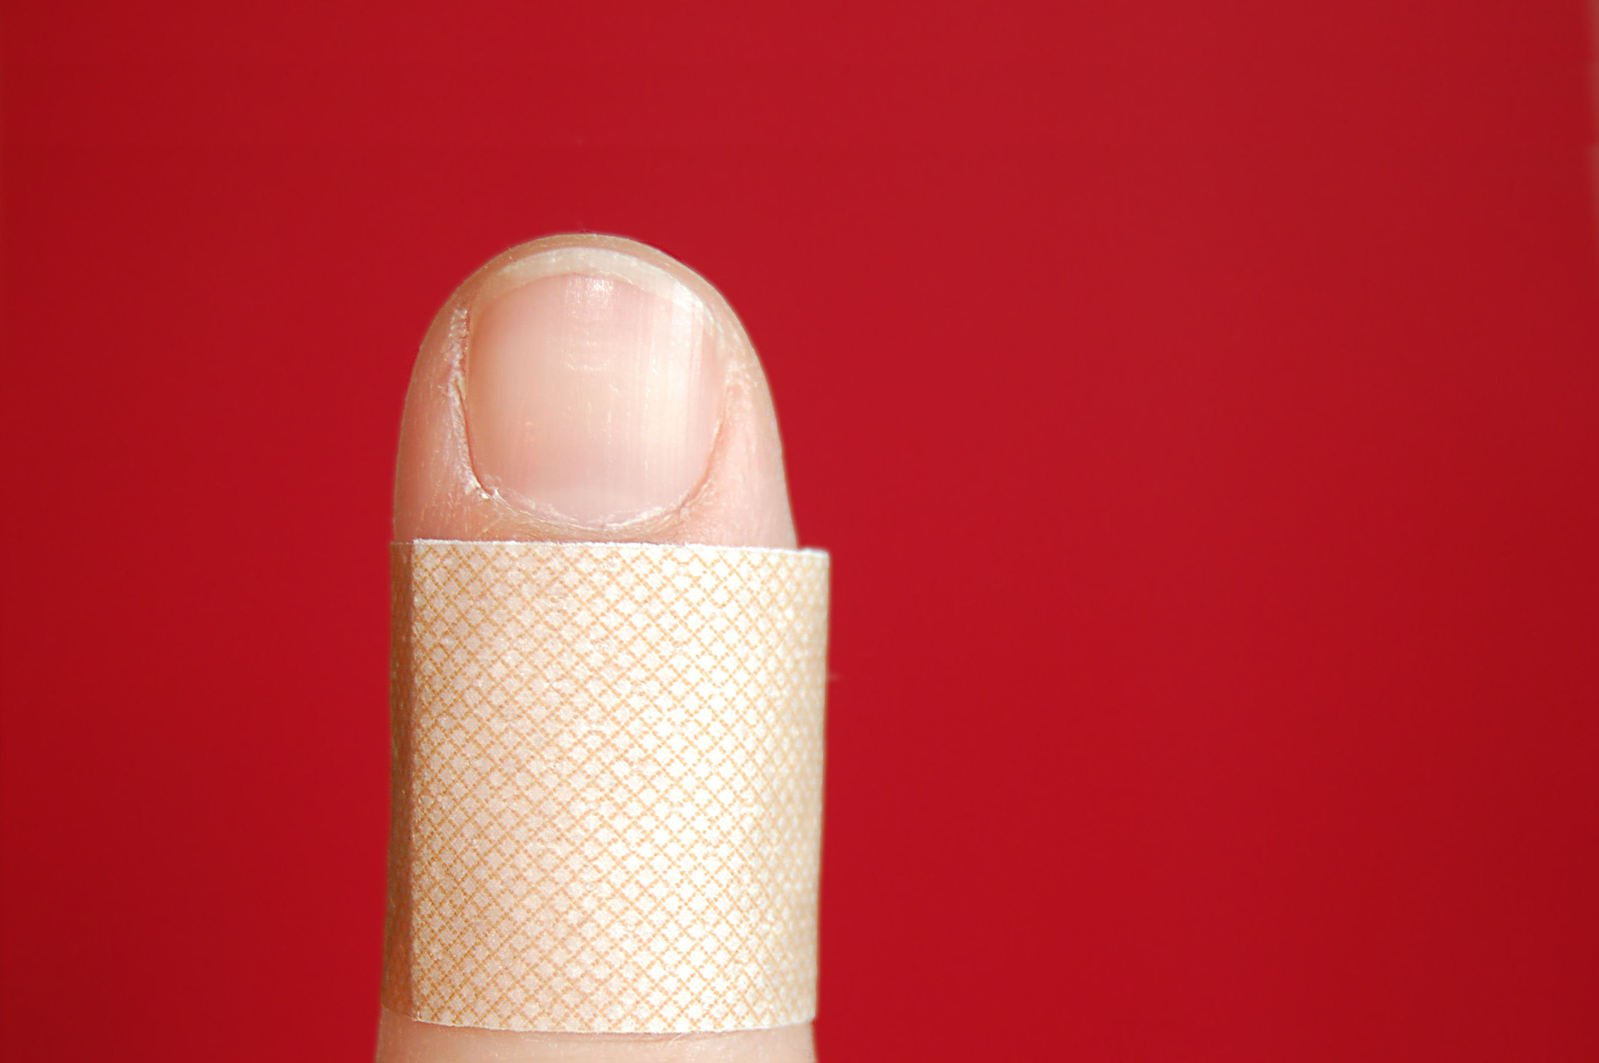 a person holding on to a finger covered in bandages